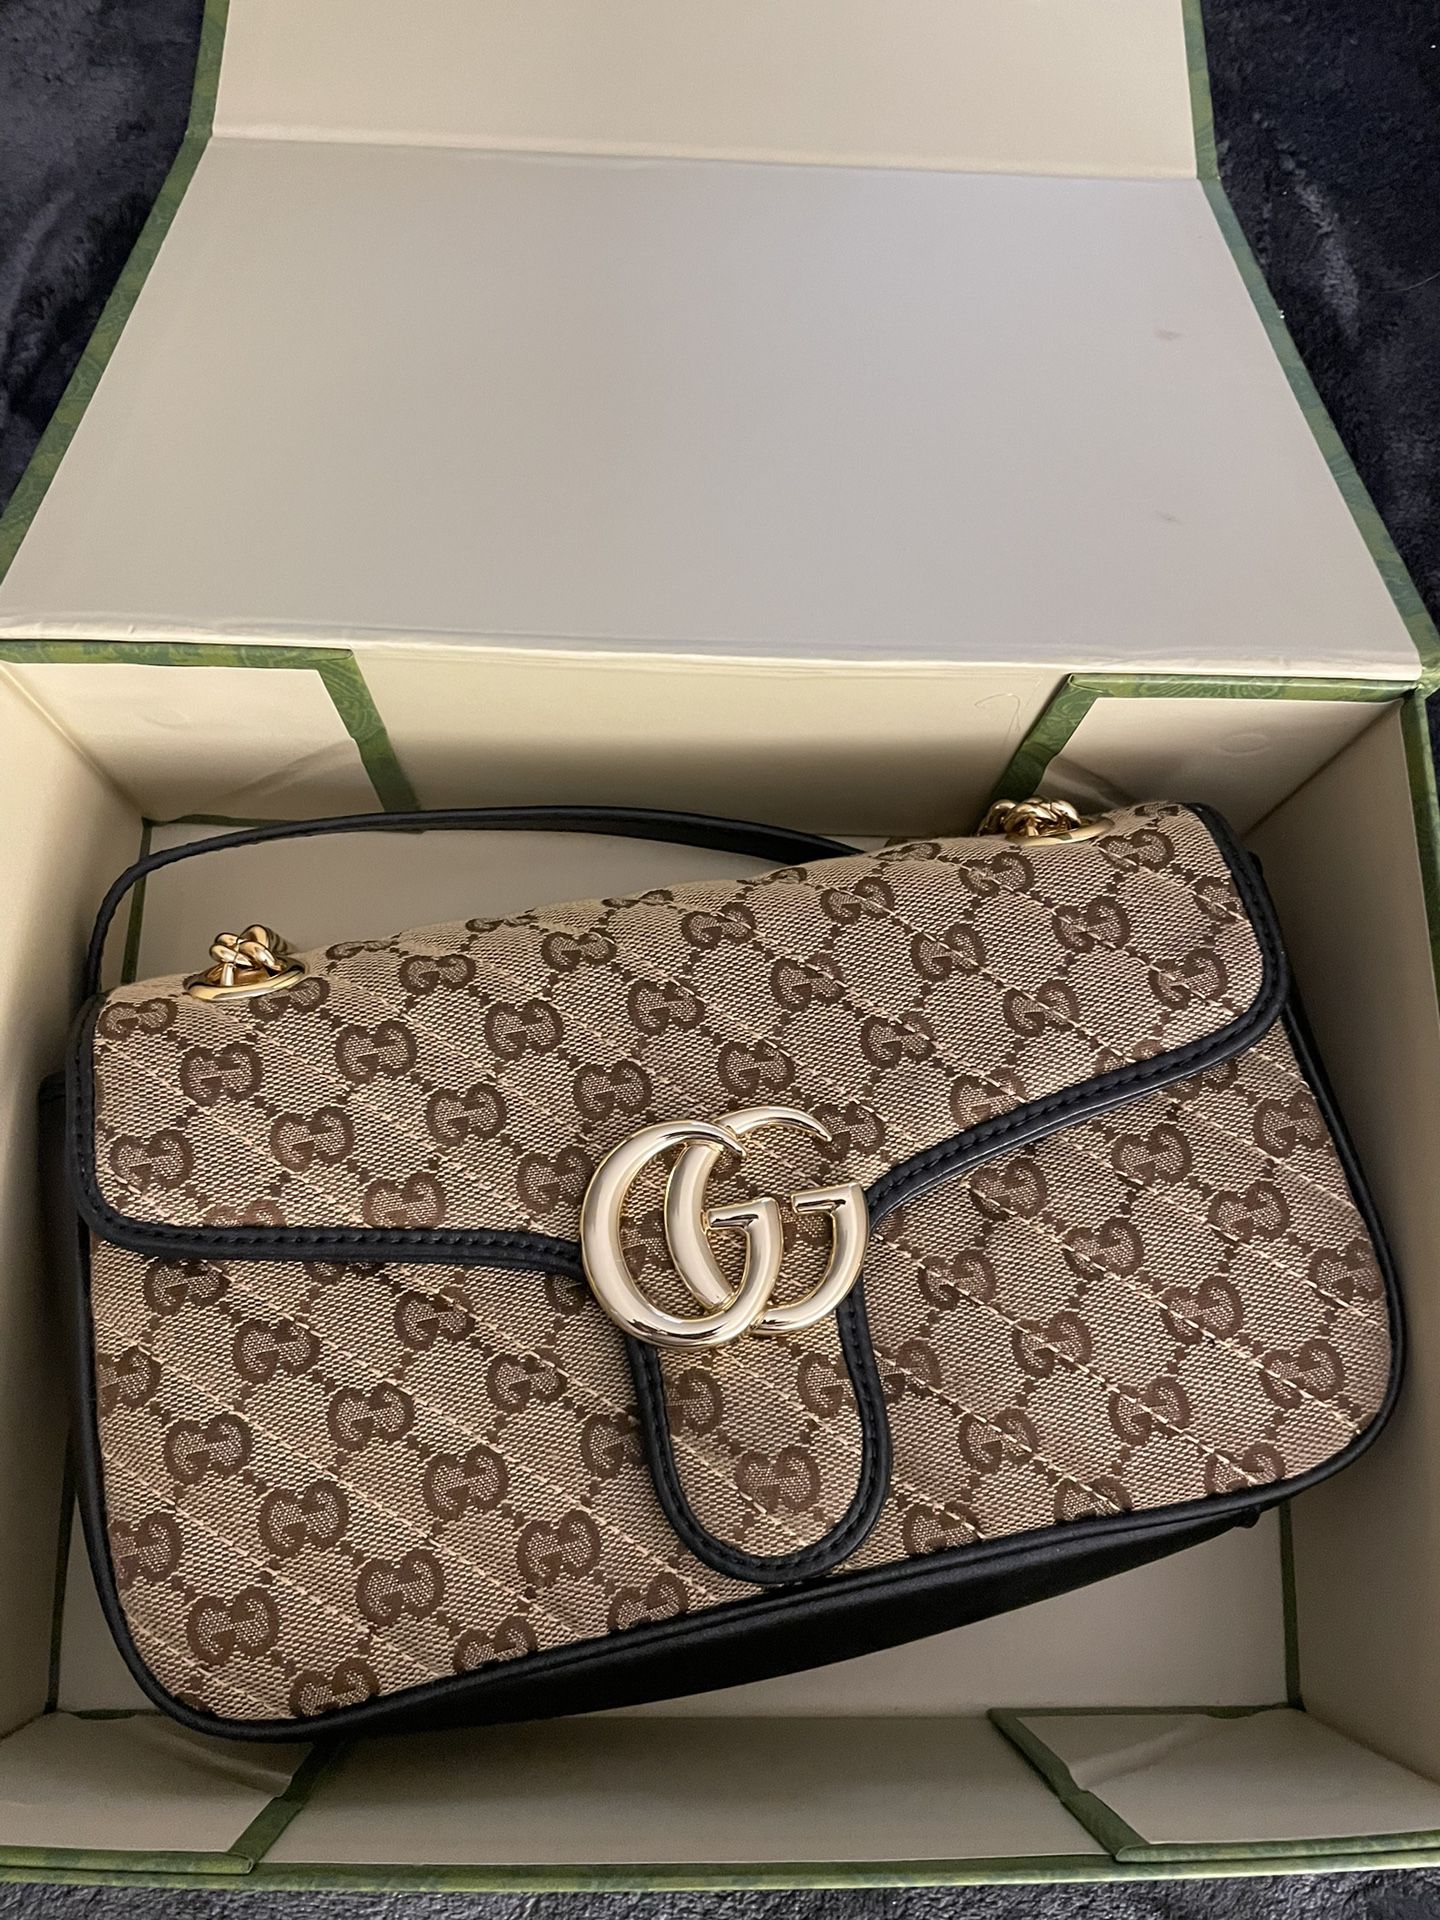 Gg running leather handbag Gucci Beige in Leather - 25926040